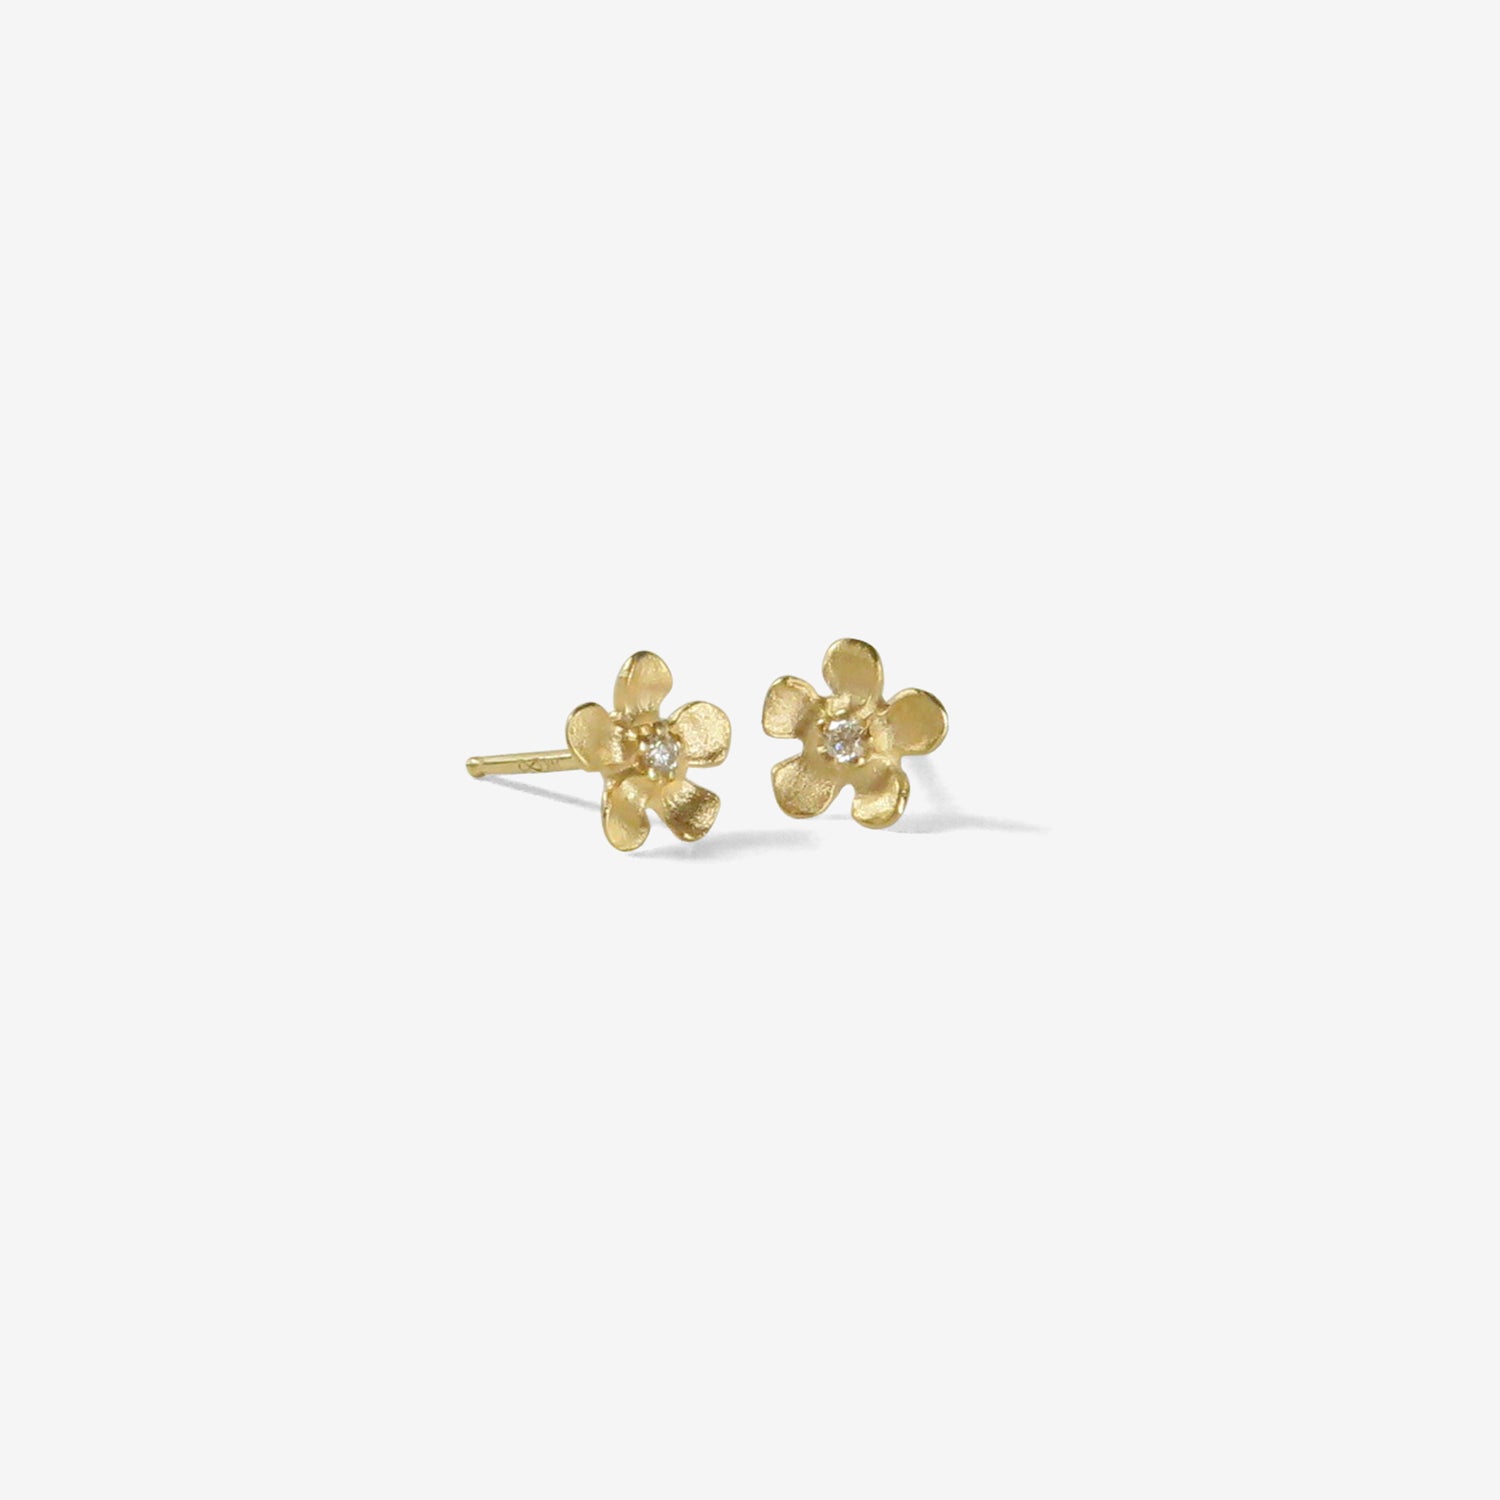 Cute Small Gold Earrings That Will Add Style To Your Day!